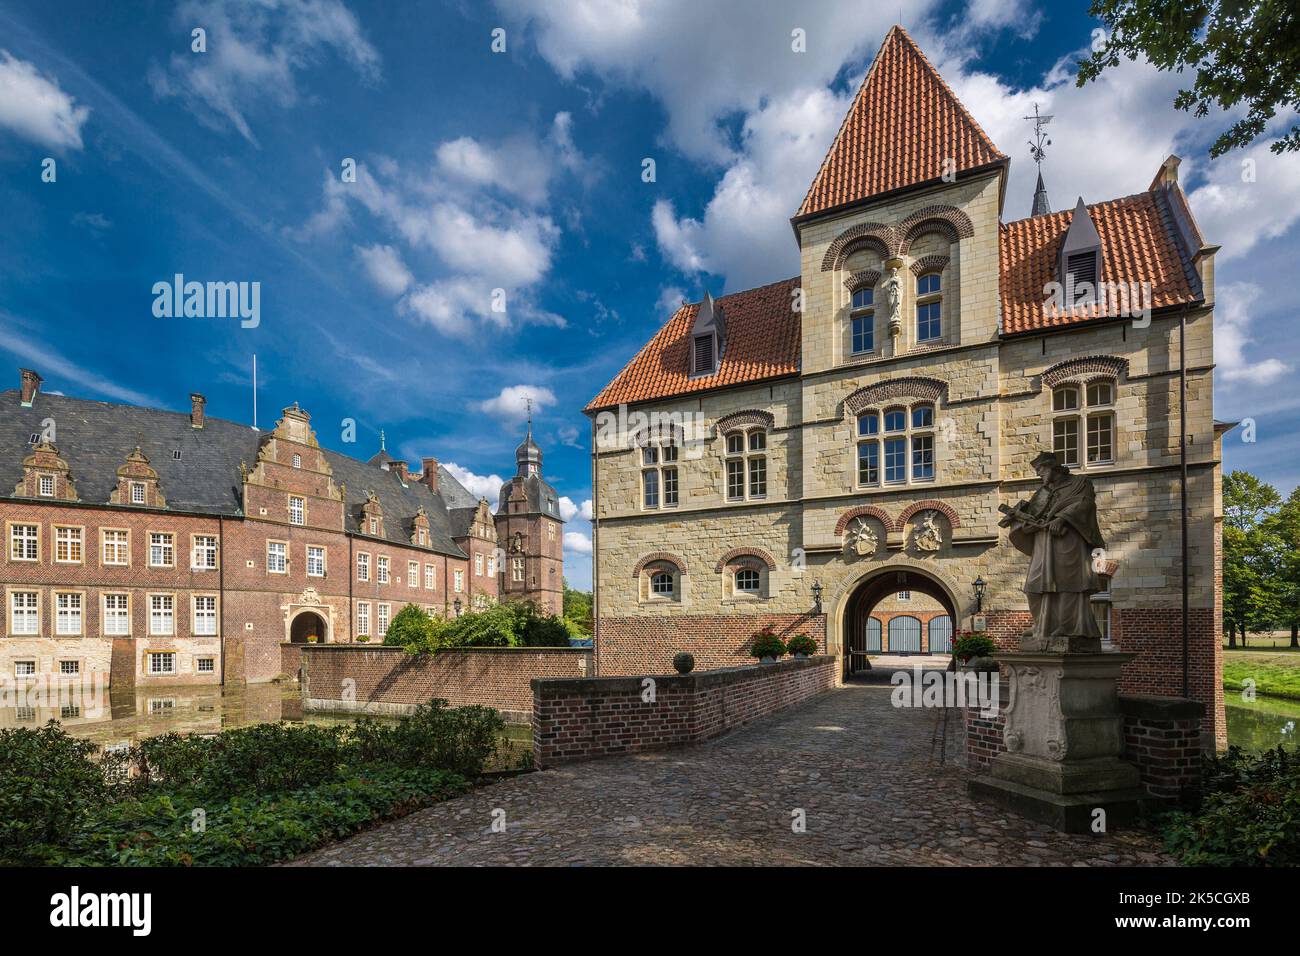 Germany, Rosendahl, Baumberge, Westmuensterland, Muensterland, Westphalia, North Rhine-Westphalia, Rosendahl-Darfeld, Darfeld Castle, former knight's seat, moat, moats, gatehouse of the outer castle and gallery building, Nepomuk statue Stock Photo